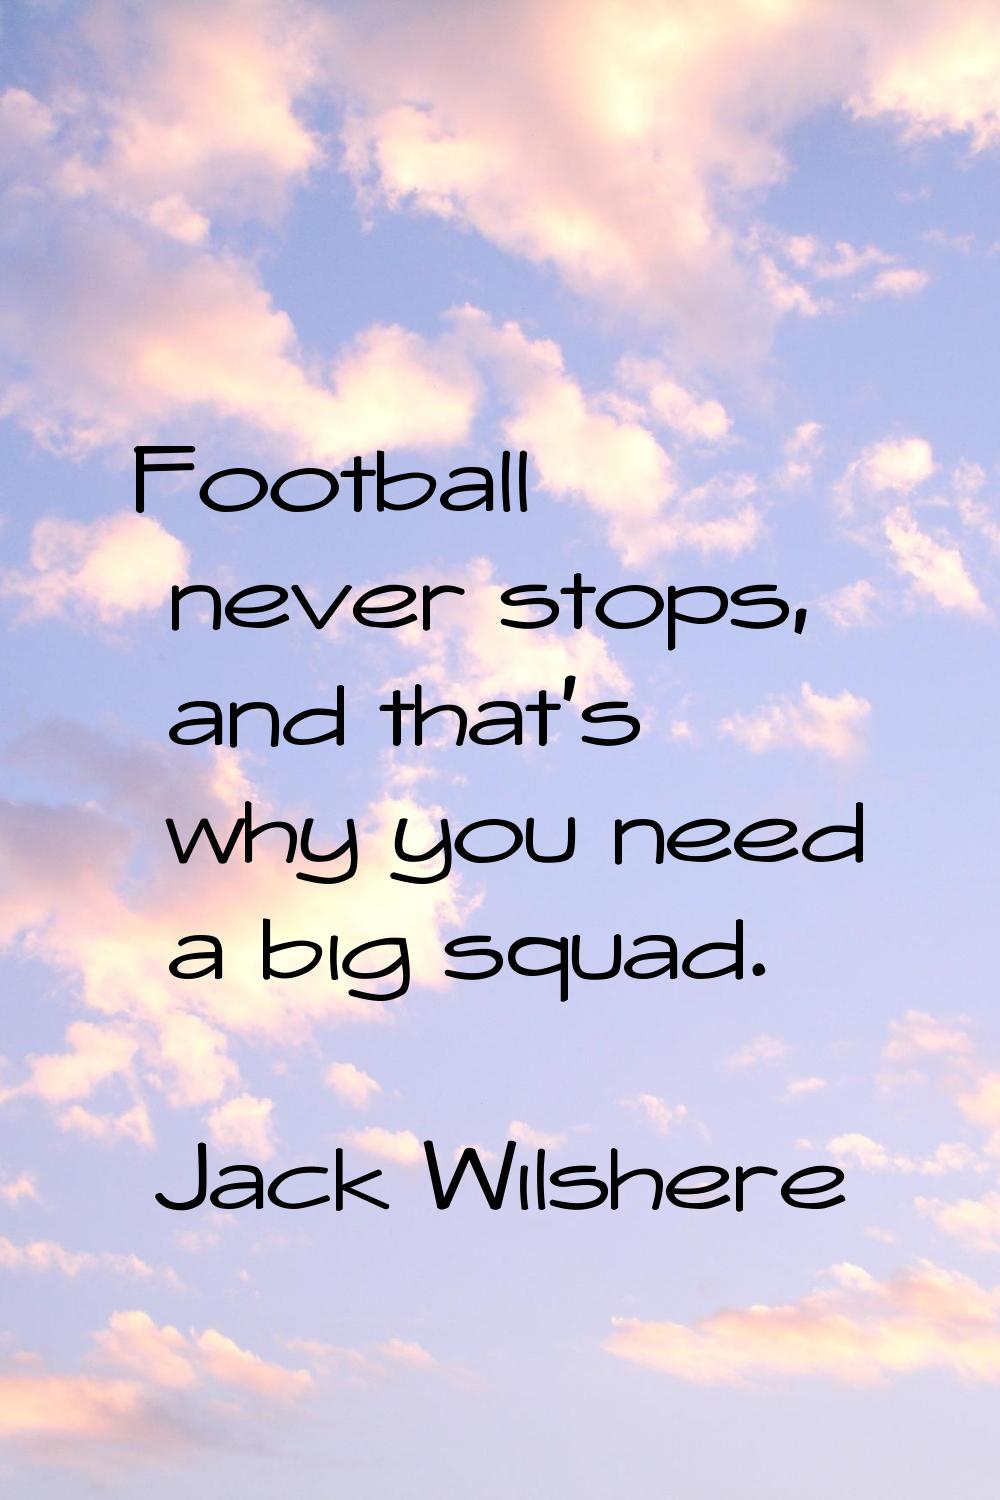 Football never stops, and that's why you need a big squad.